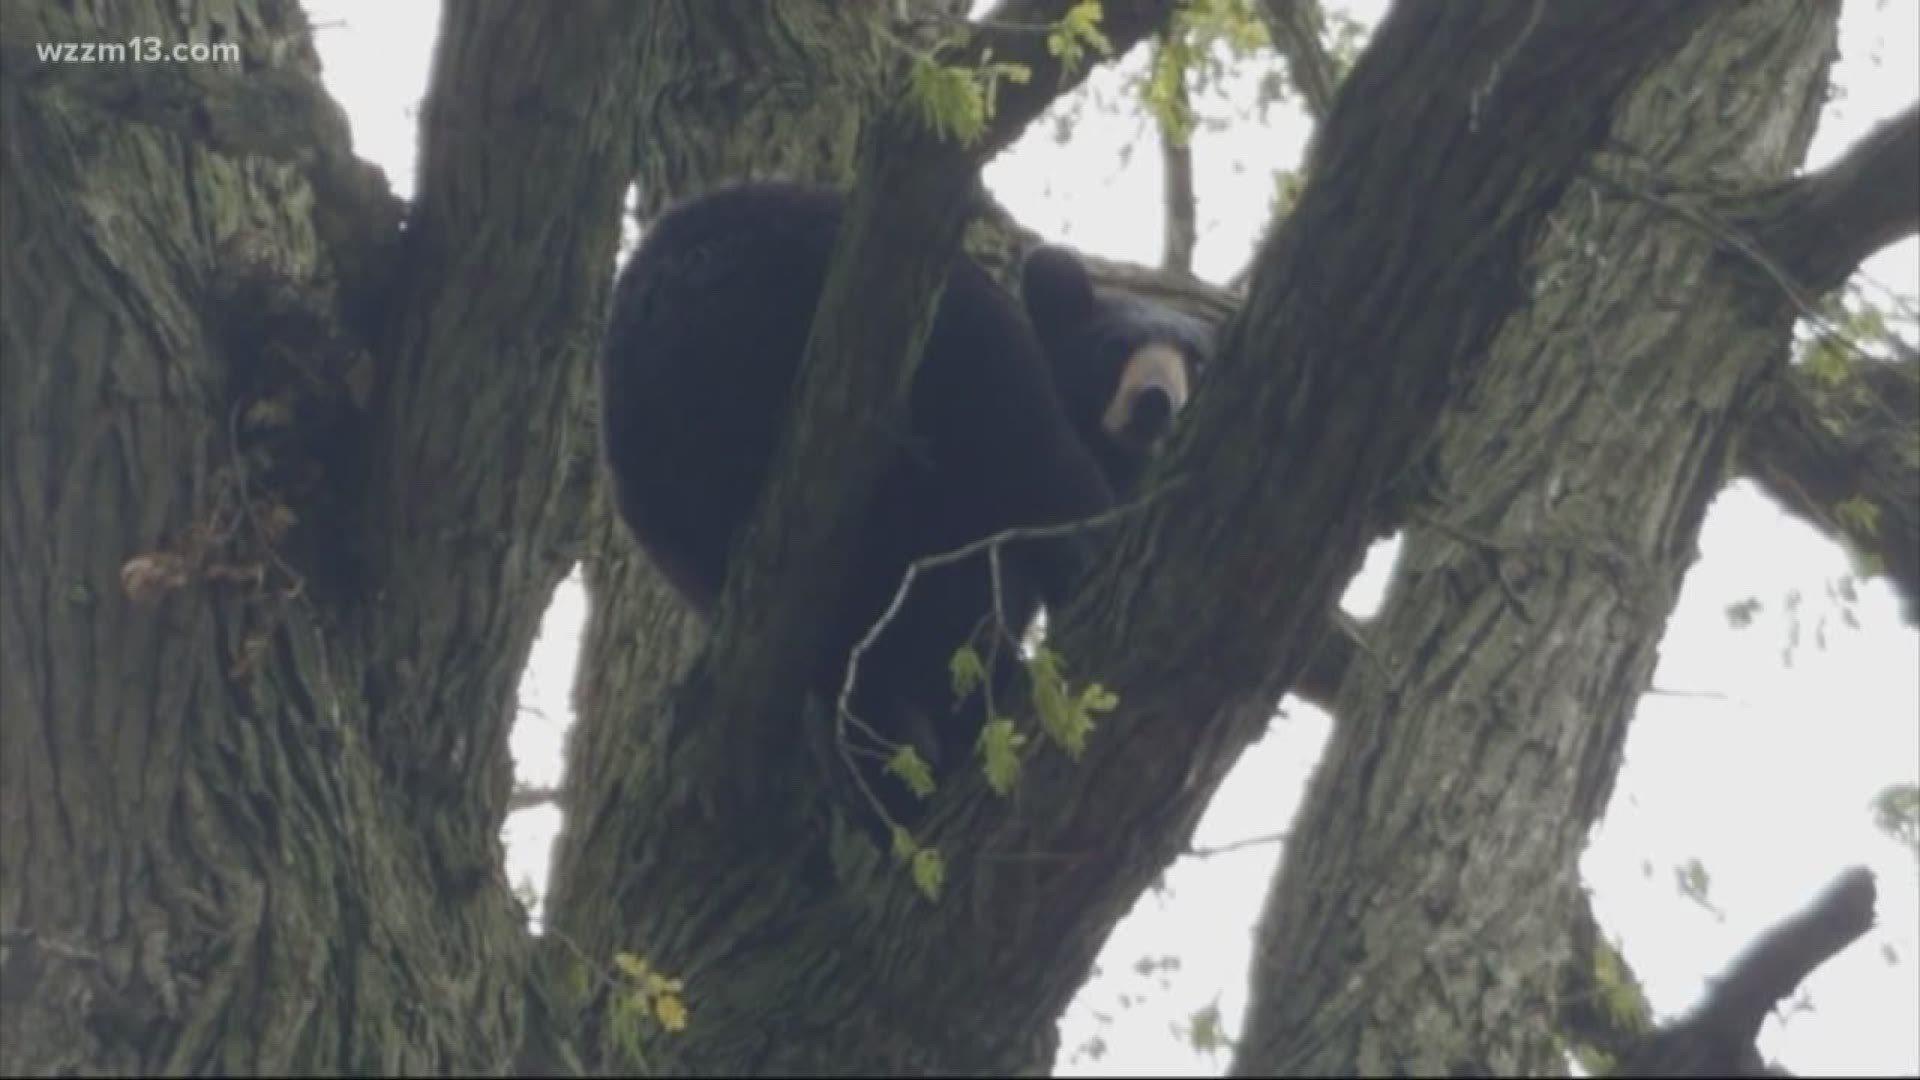 The Michigan Department of Natural Resources captured the male black bear Sunday morning.